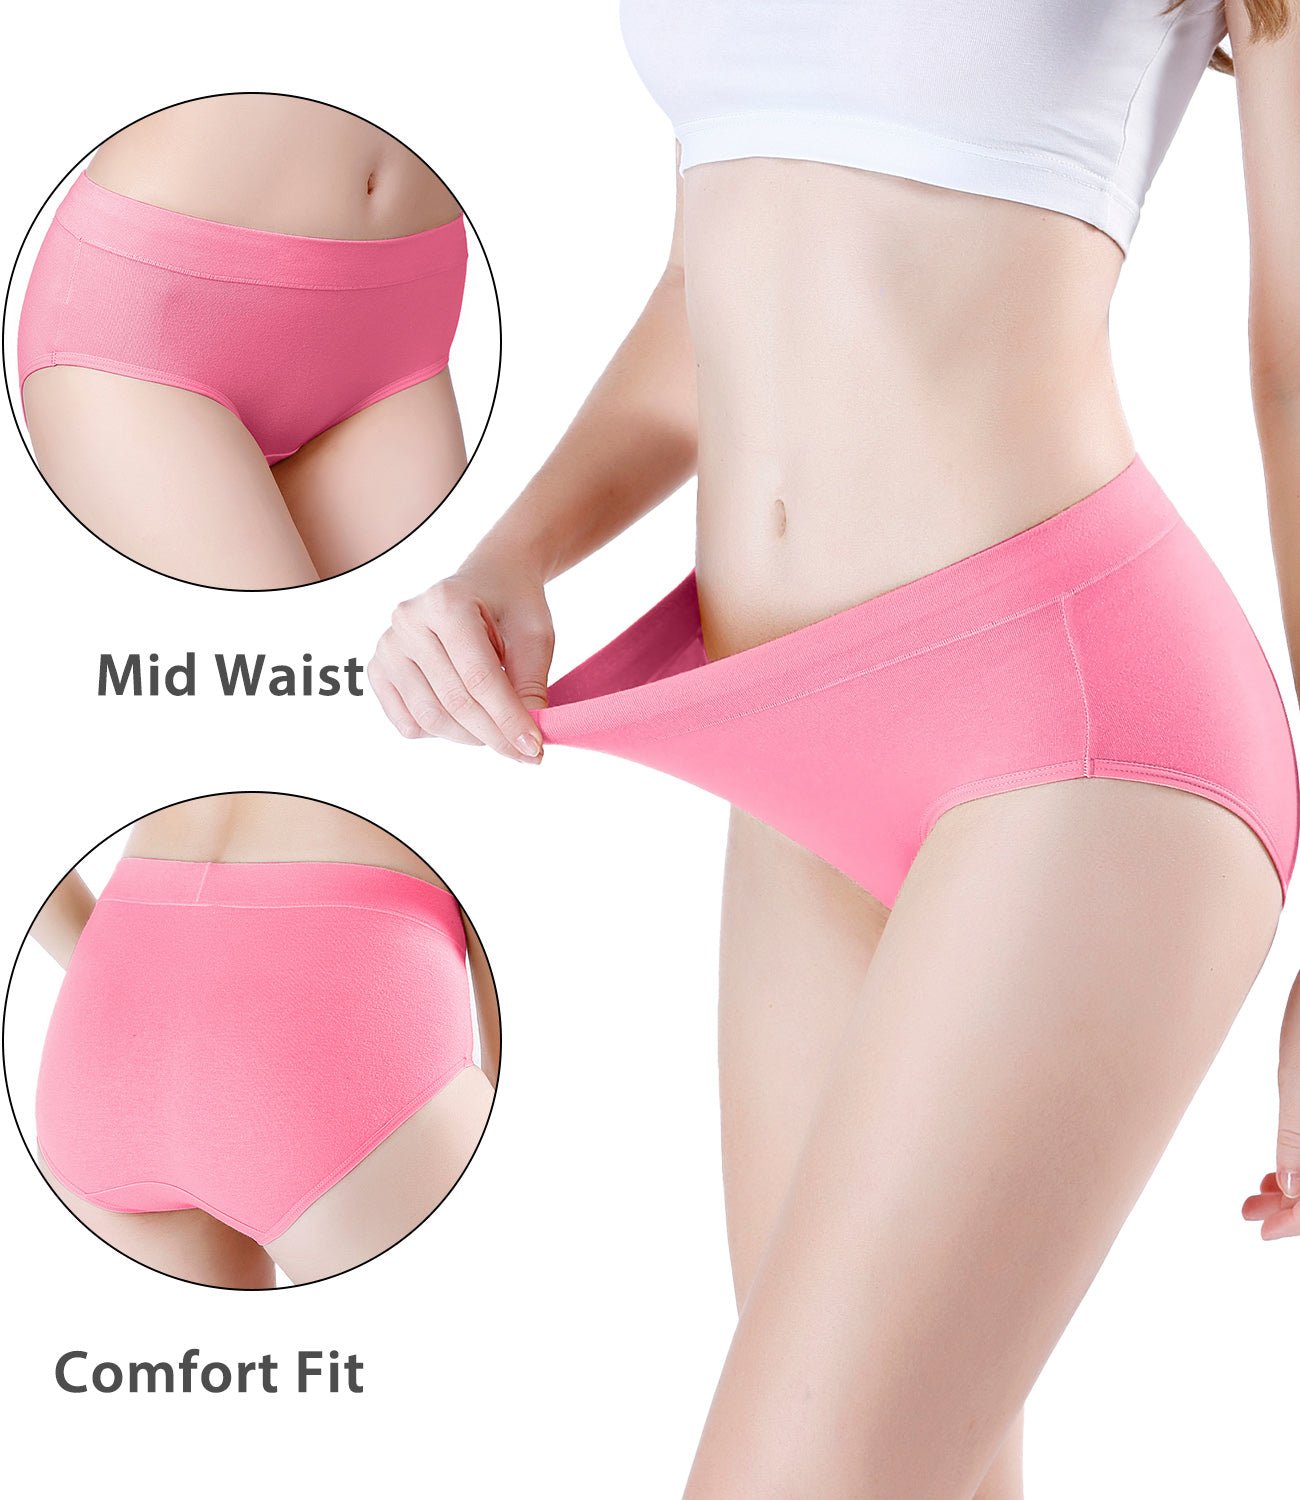 wirarpa Women's High Waisted Soft 100 Cotton Underwear Panties Ladies Latex  Free High Cut French Briefs 4 Pack Size 7